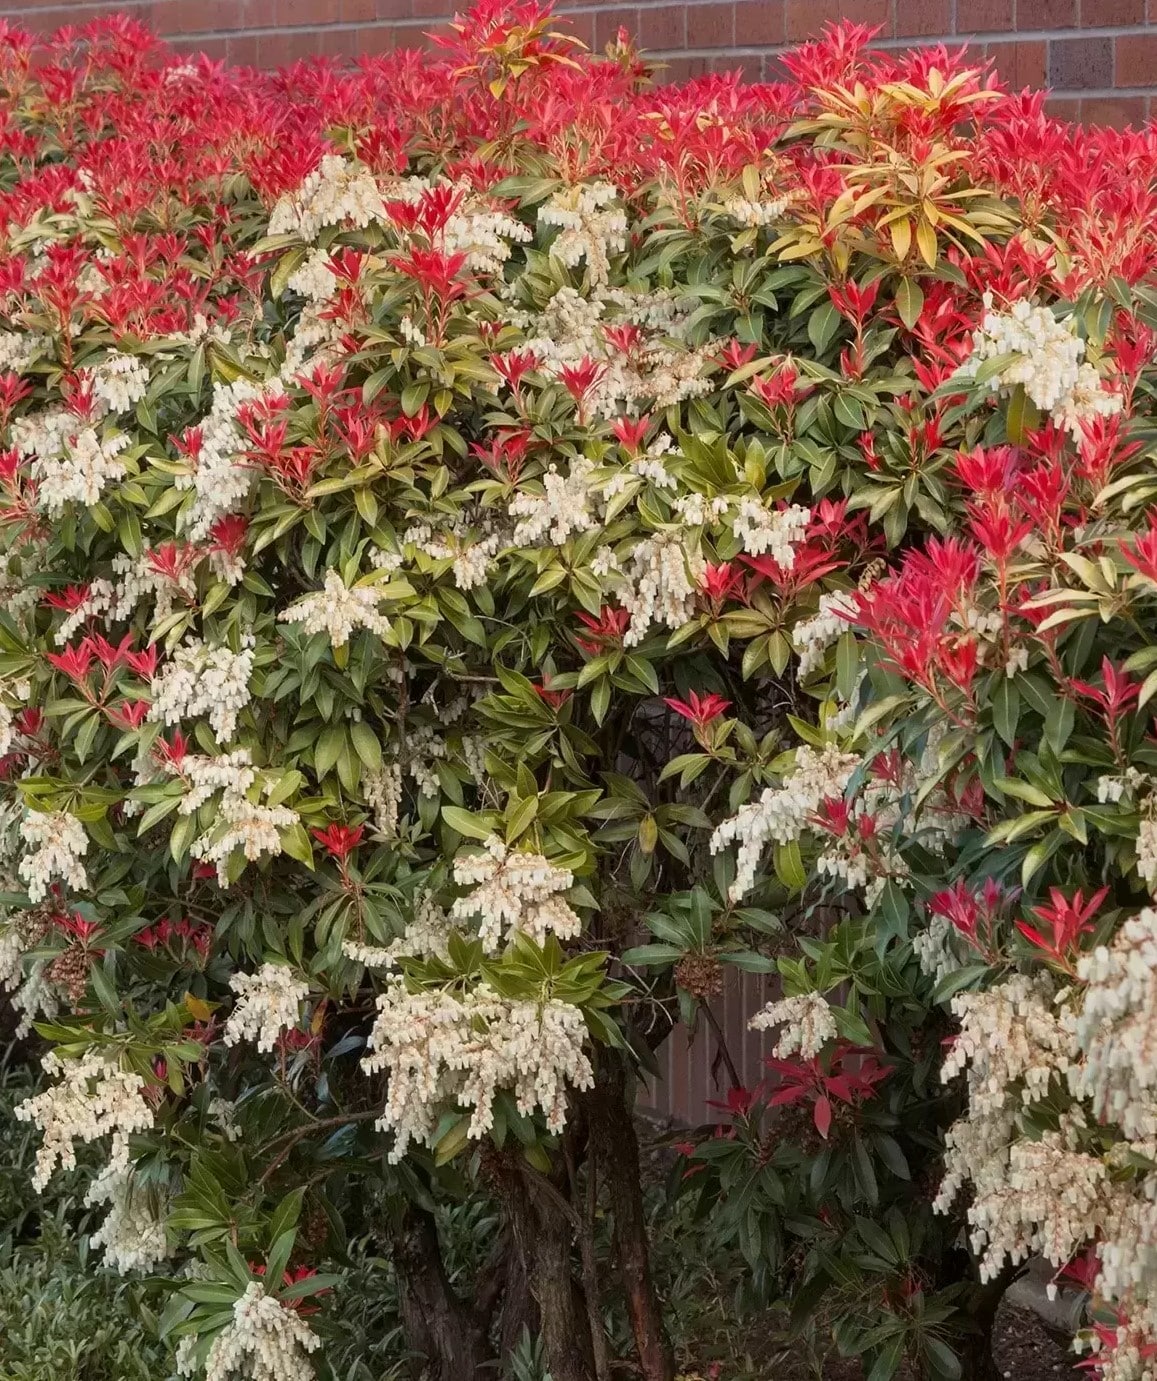 Japanese pieris andromeda in red and green foliage covered in white flowers.